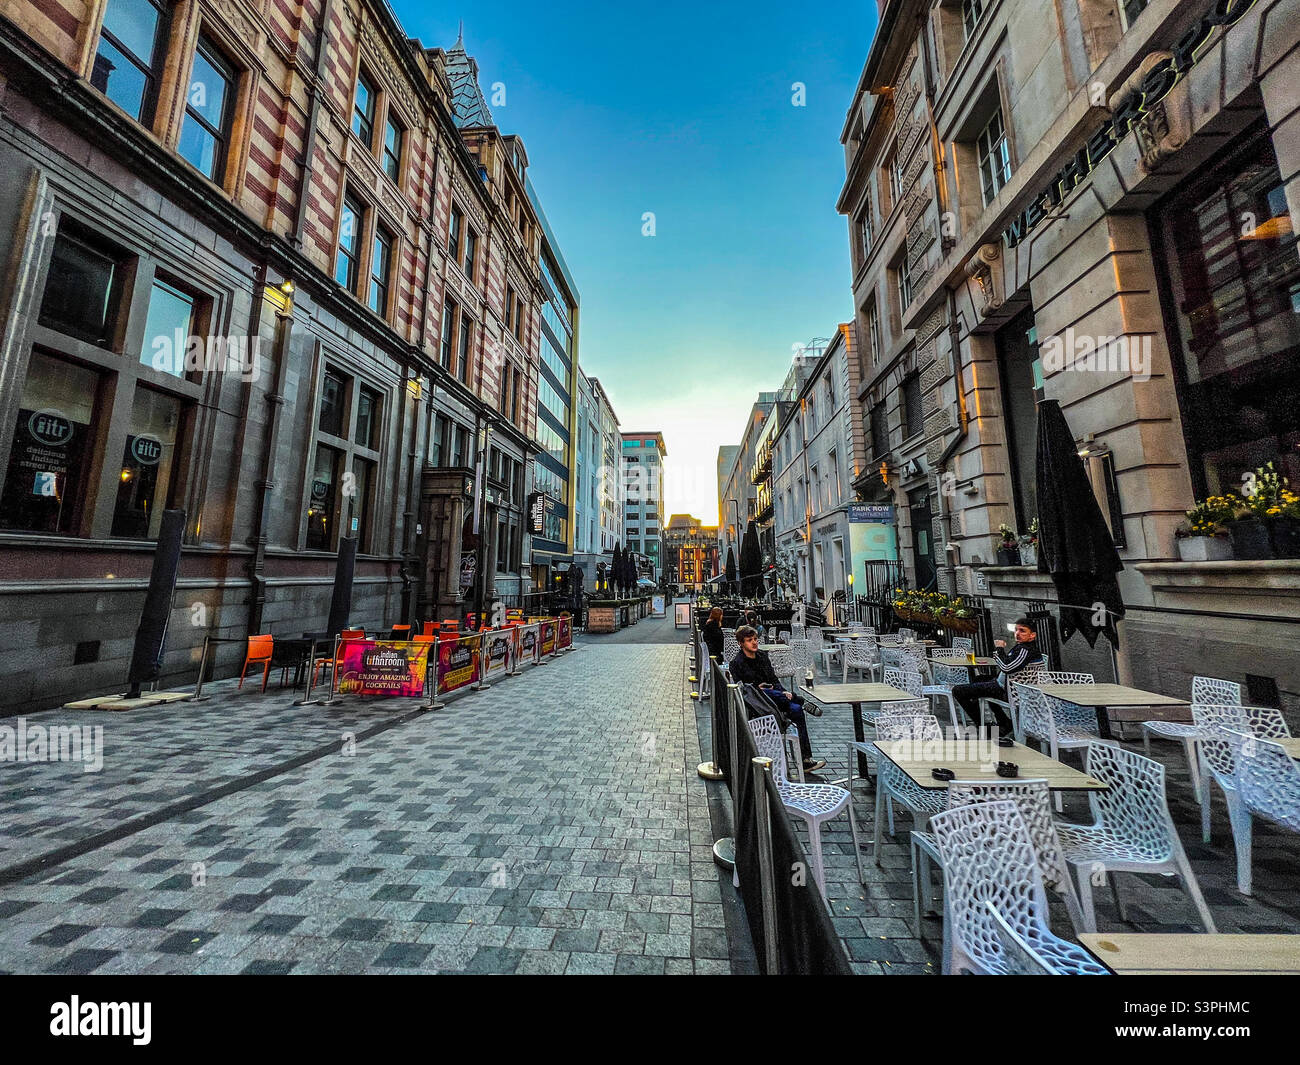 View of Greek Street drinking and bars in Leeds city centre Stock Photo